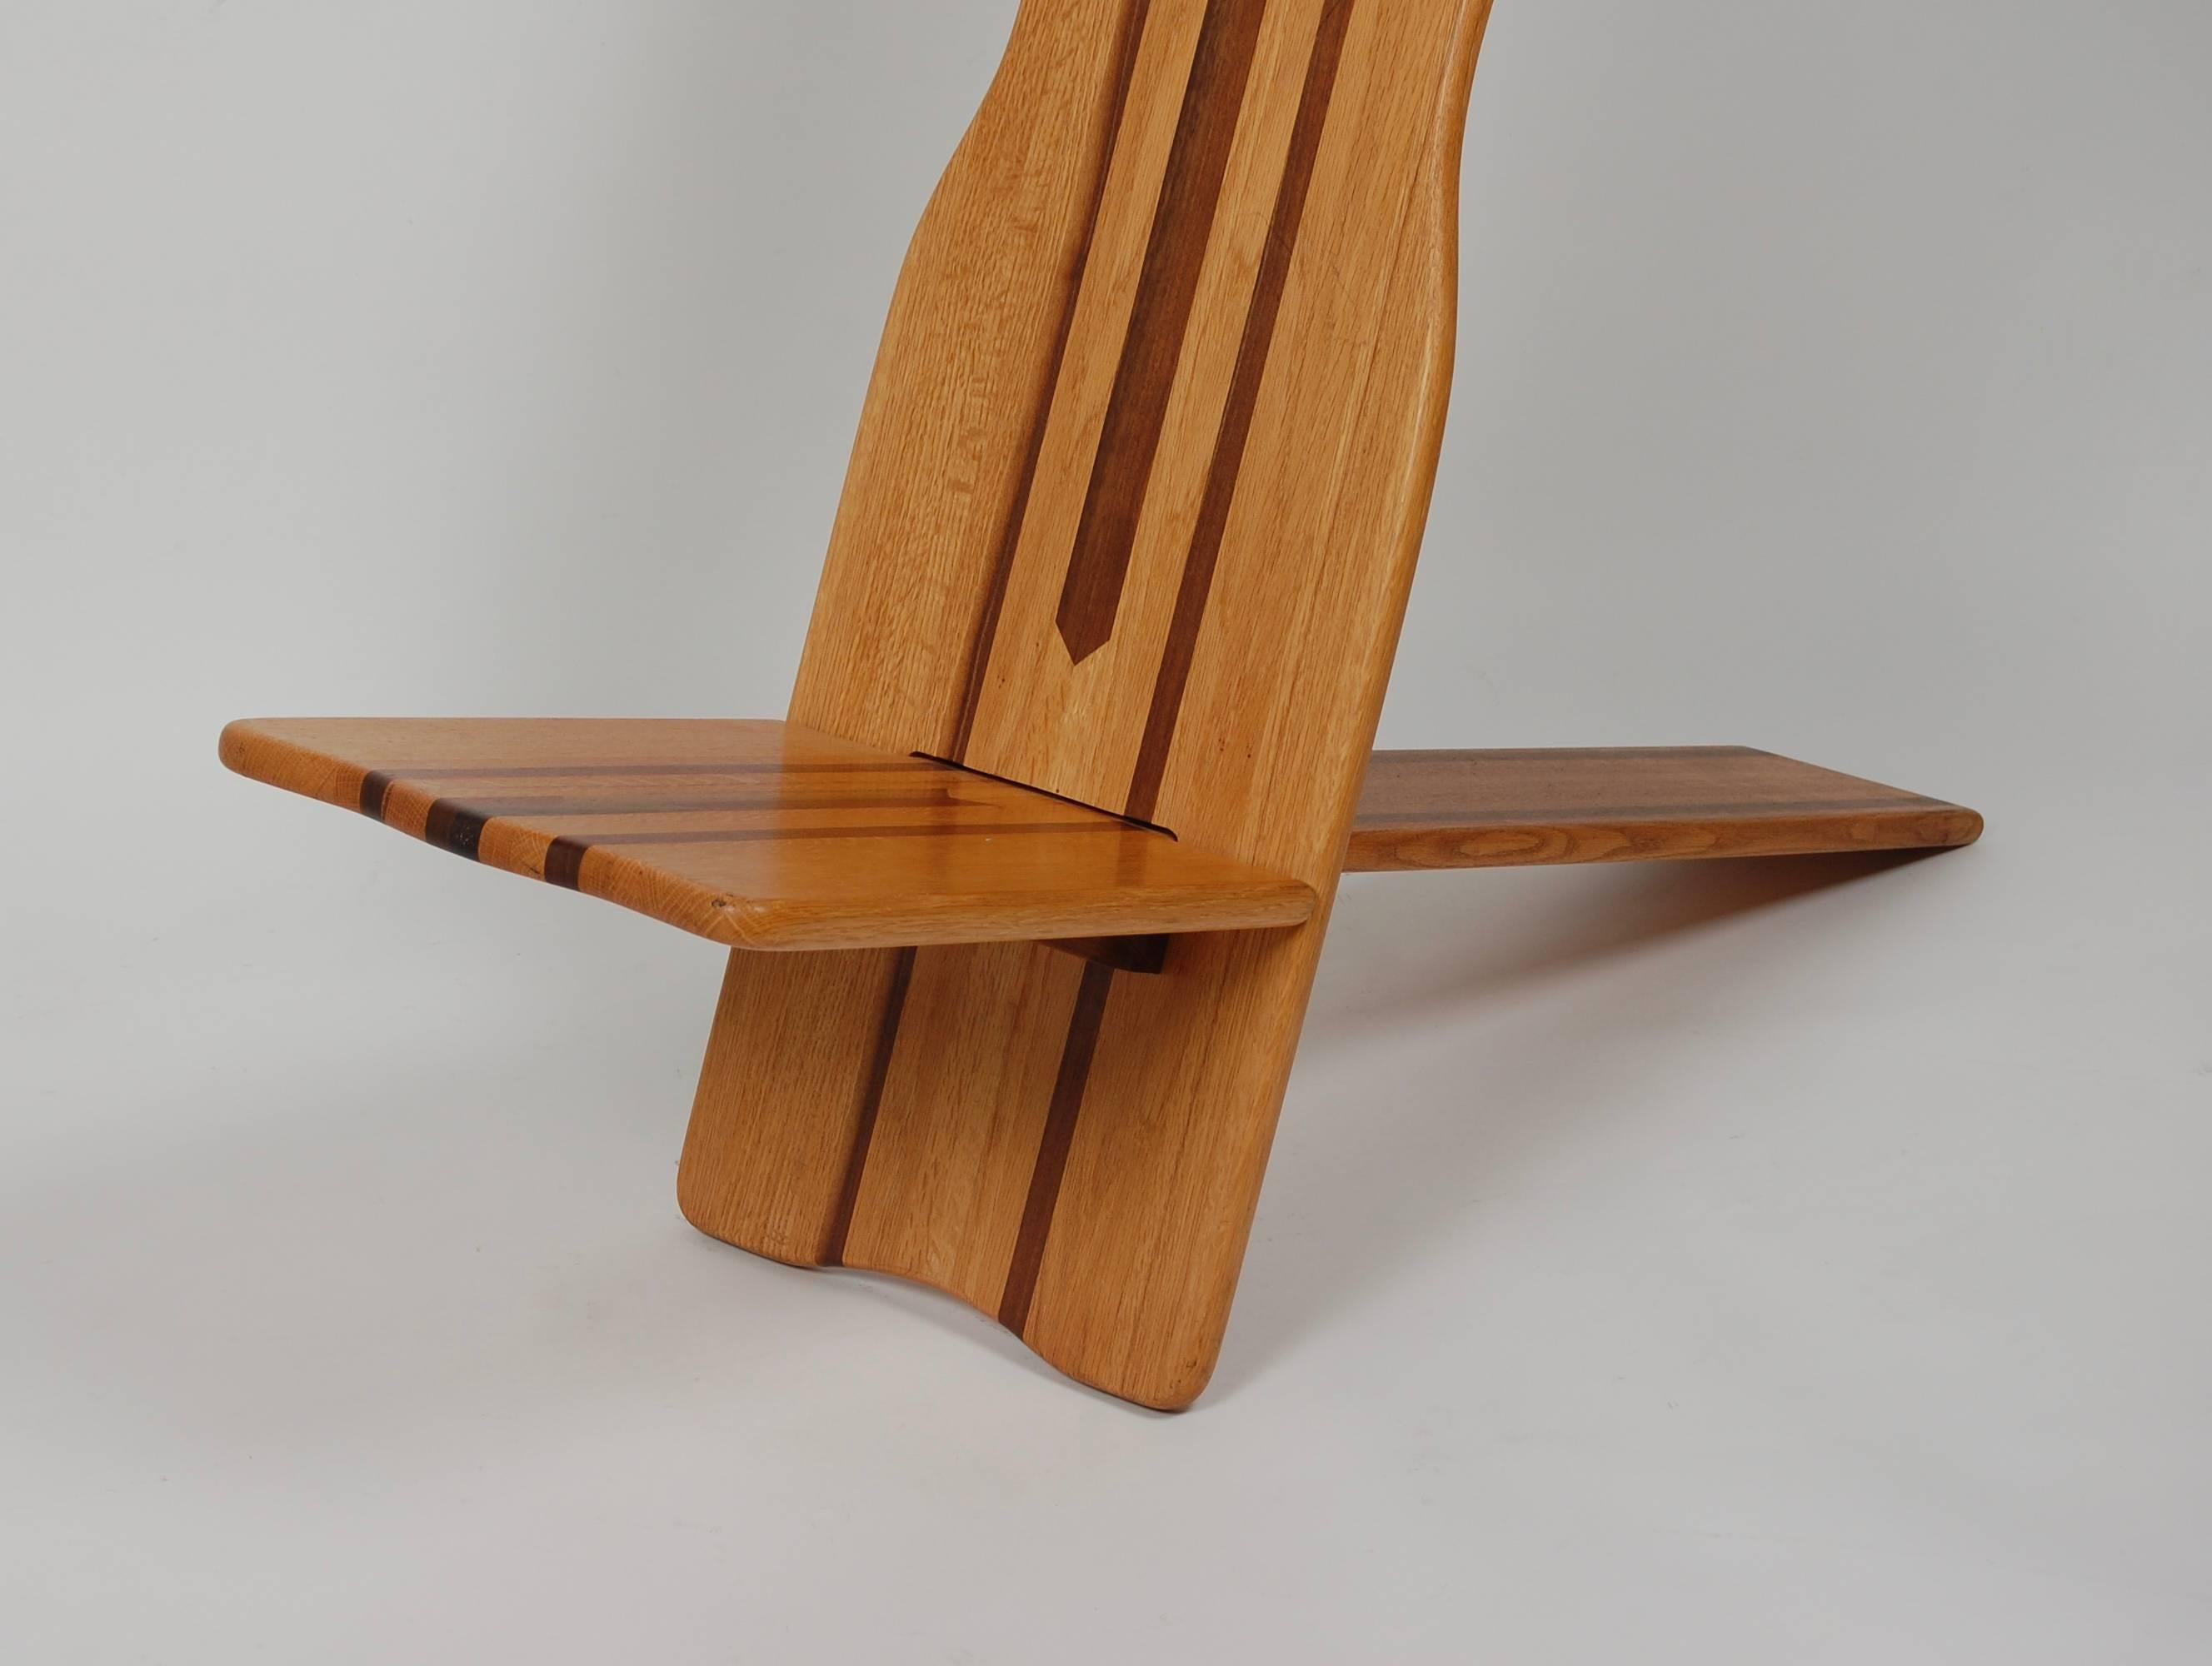 Two-piece slat chair constructed of ash, California walnut and black walnut created during the 1970s from an estate in Bolinas, California. The designed is inspired by the African Chiefs chair.